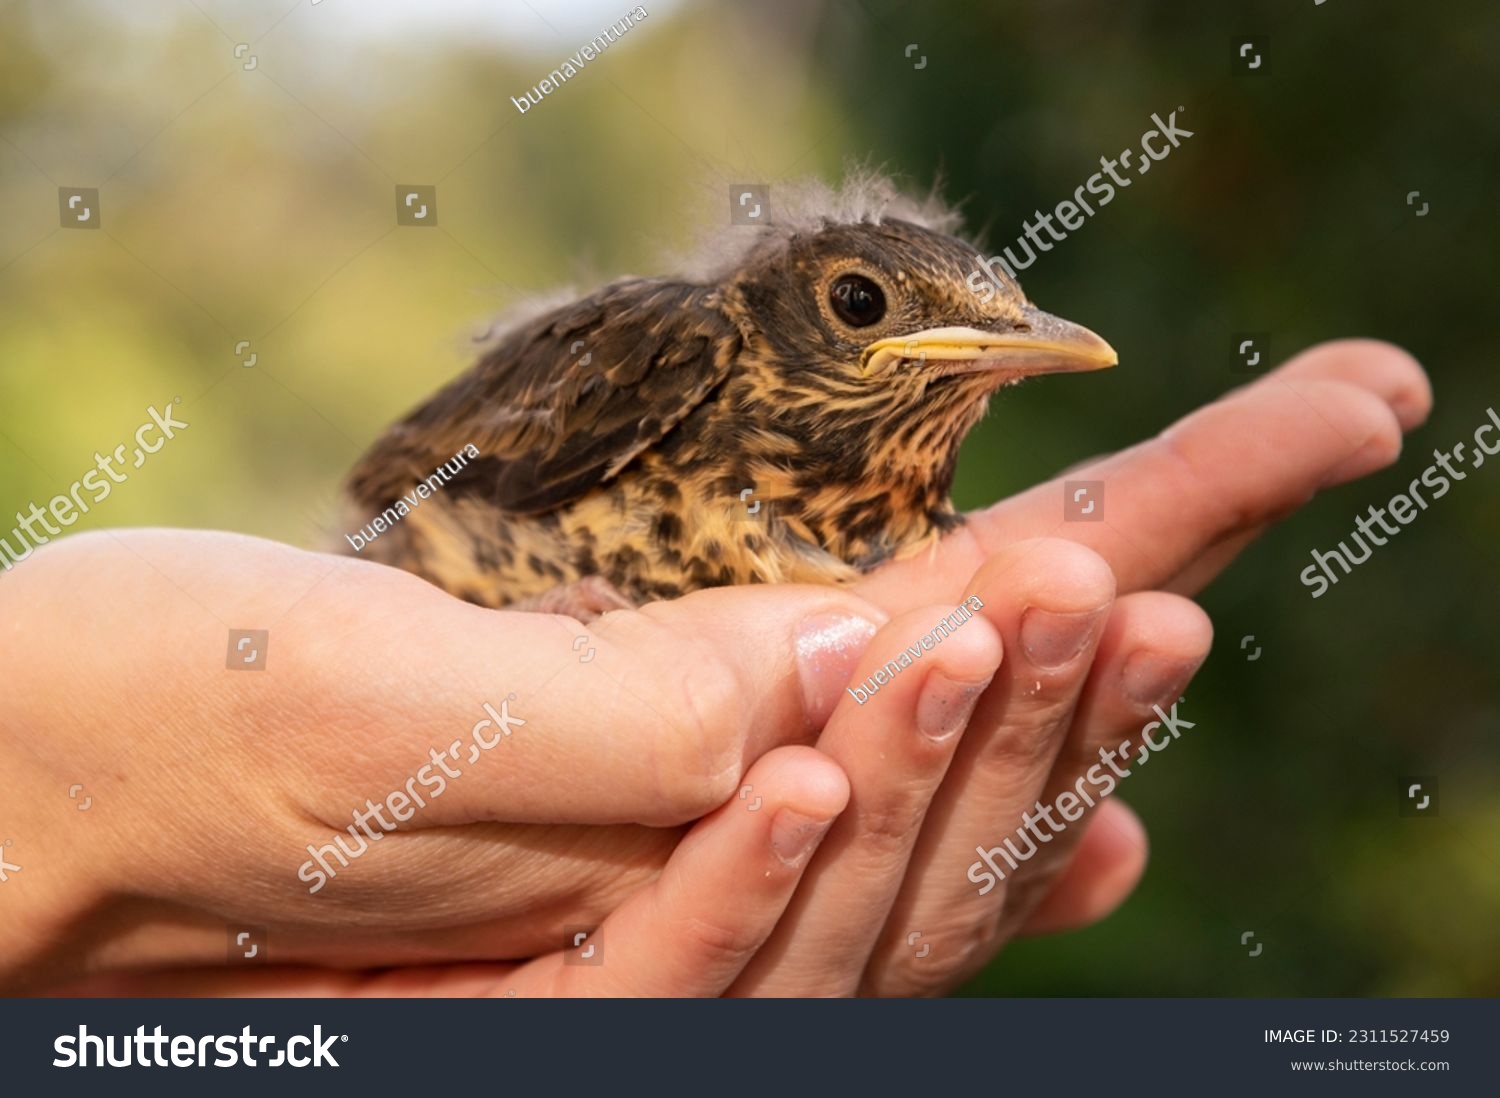 Human hands taking care of a baby bird that fell from its nest. Thrush bird. #2311527459